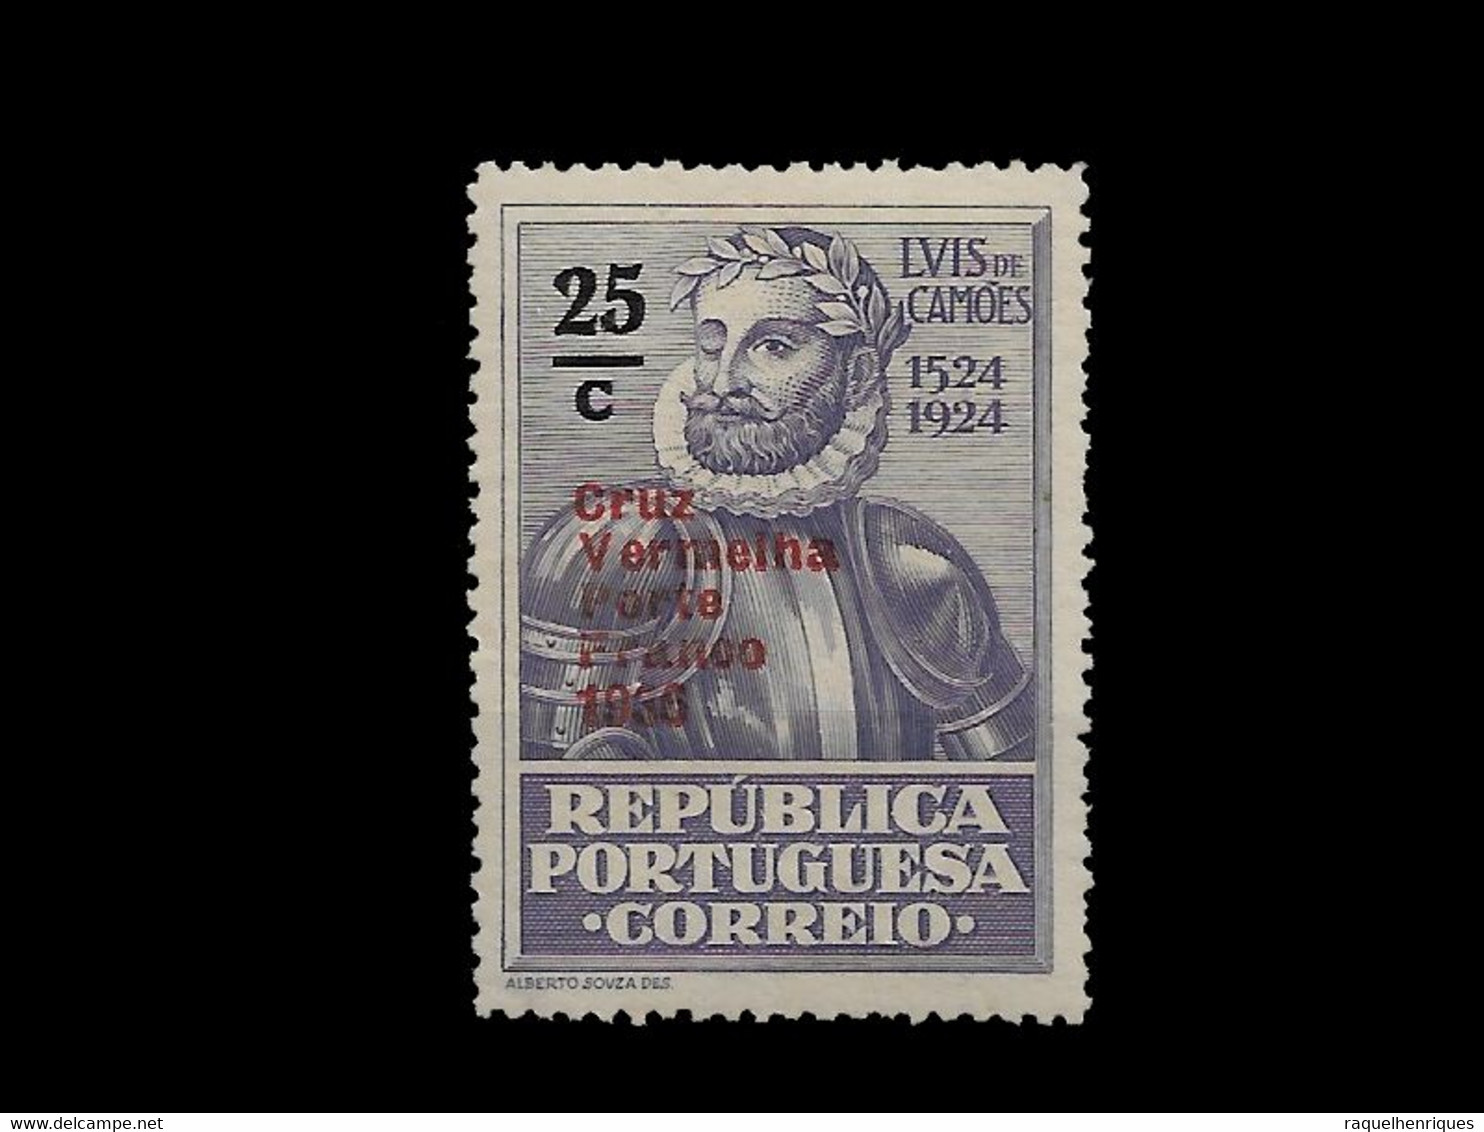 PORTUGAL PORTE FRANCO - 1936 ERROR RED SURCHARGED MNH (PLB#01-139) - Unused Stamps